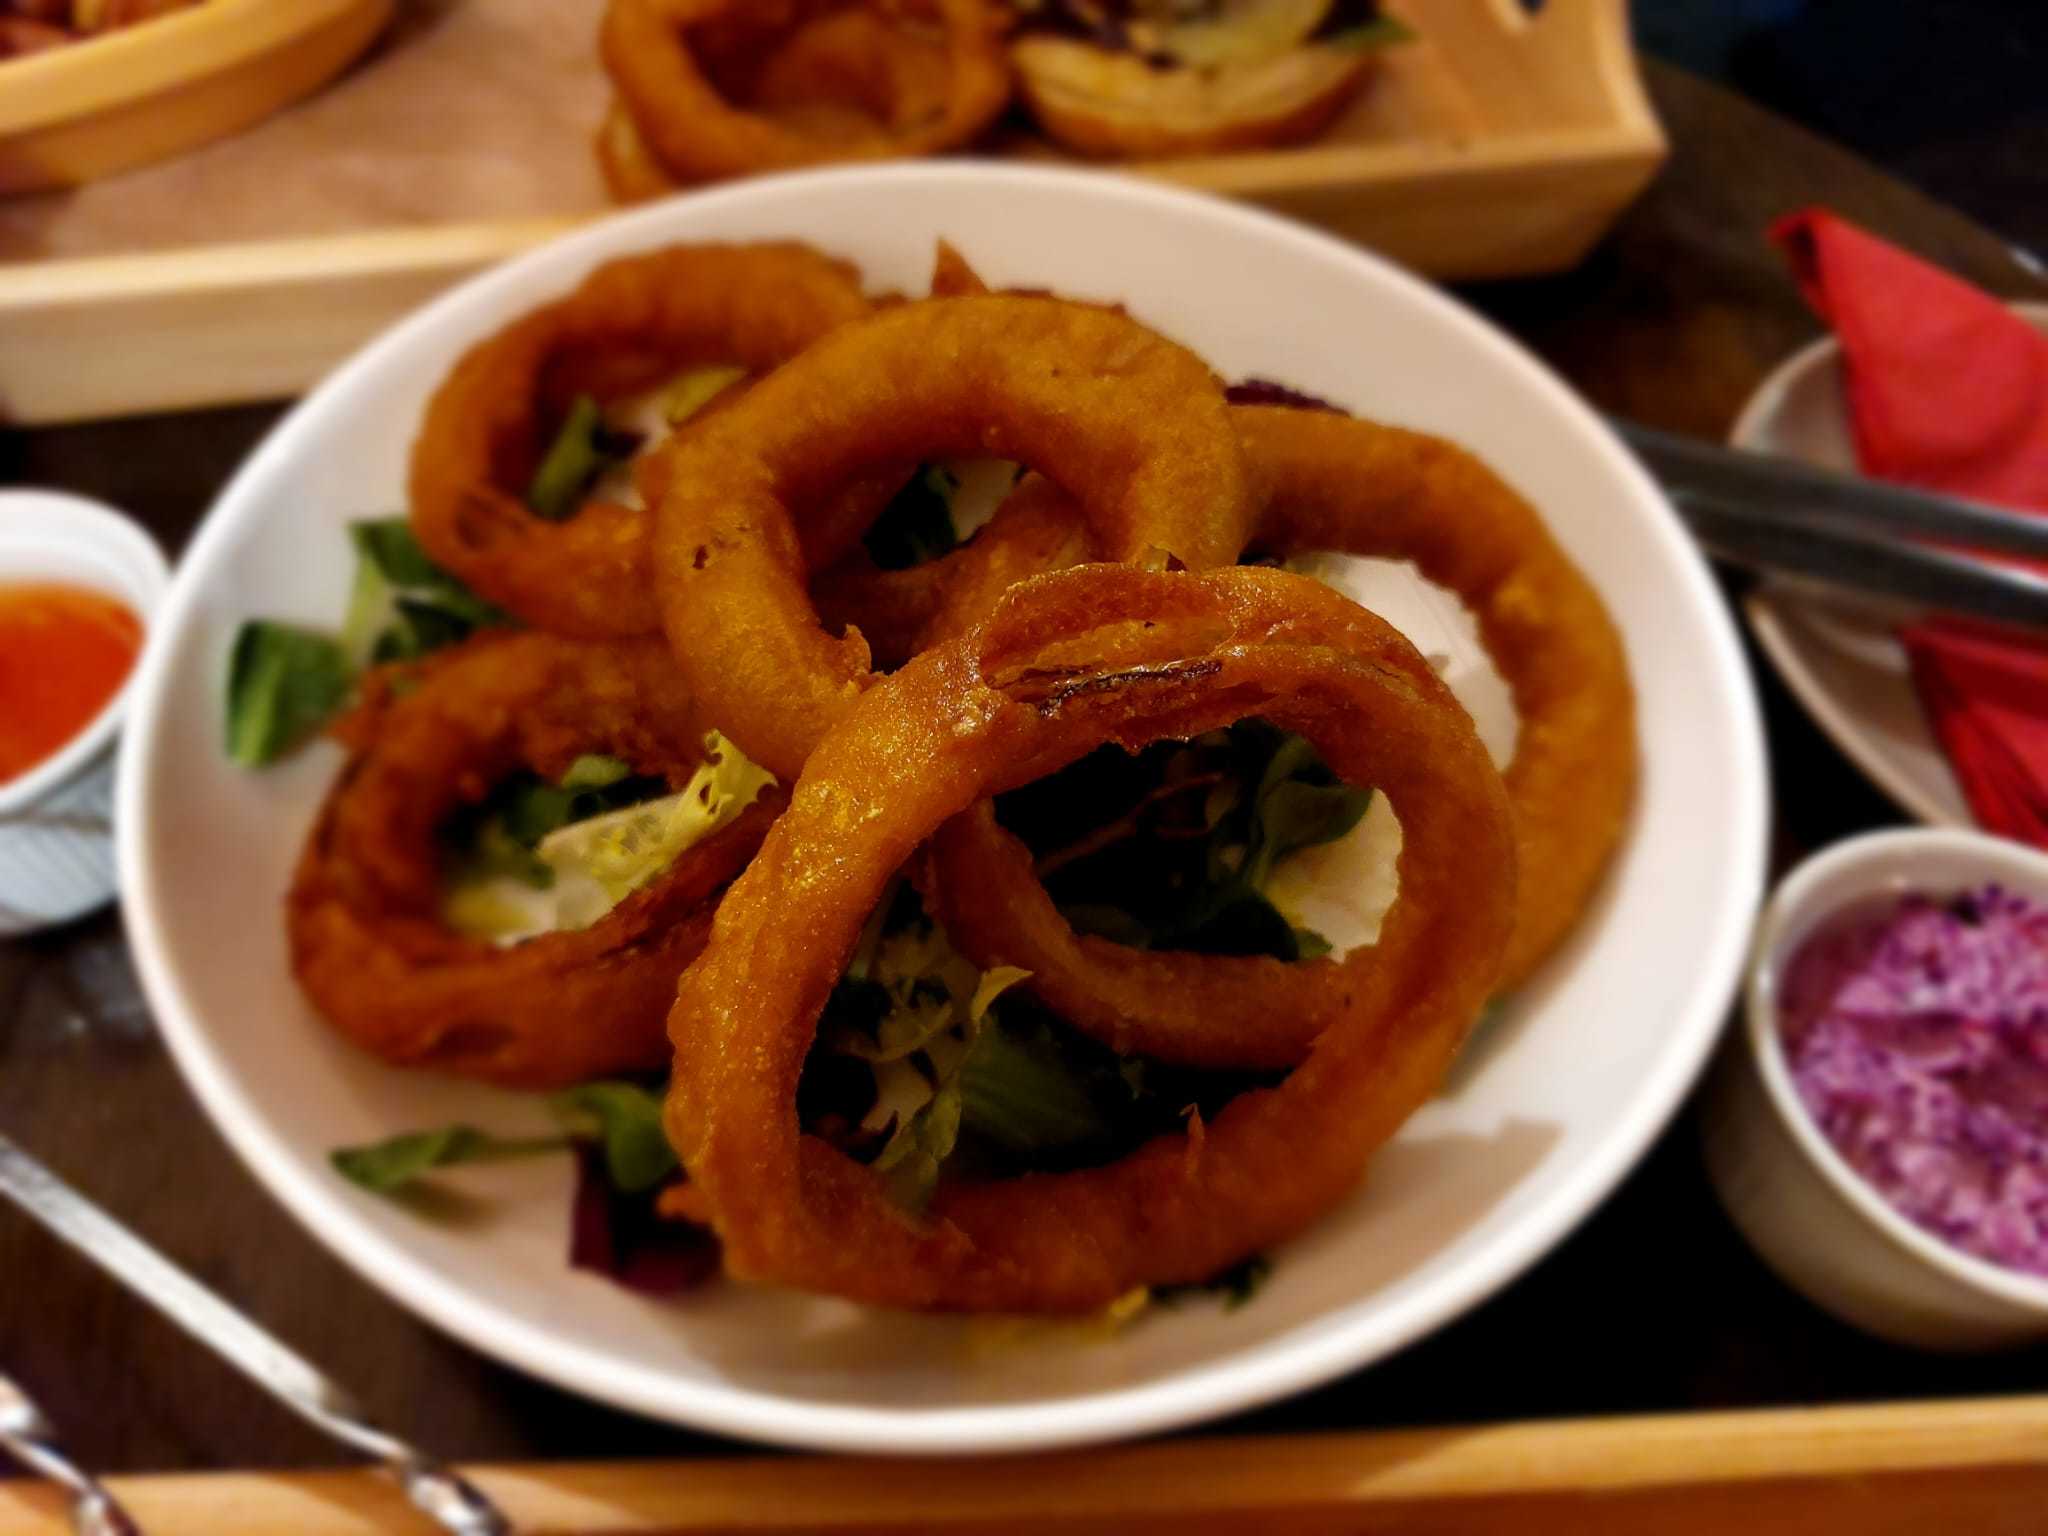 A side of onion rings at the Fox & Grapes in Hawarden.